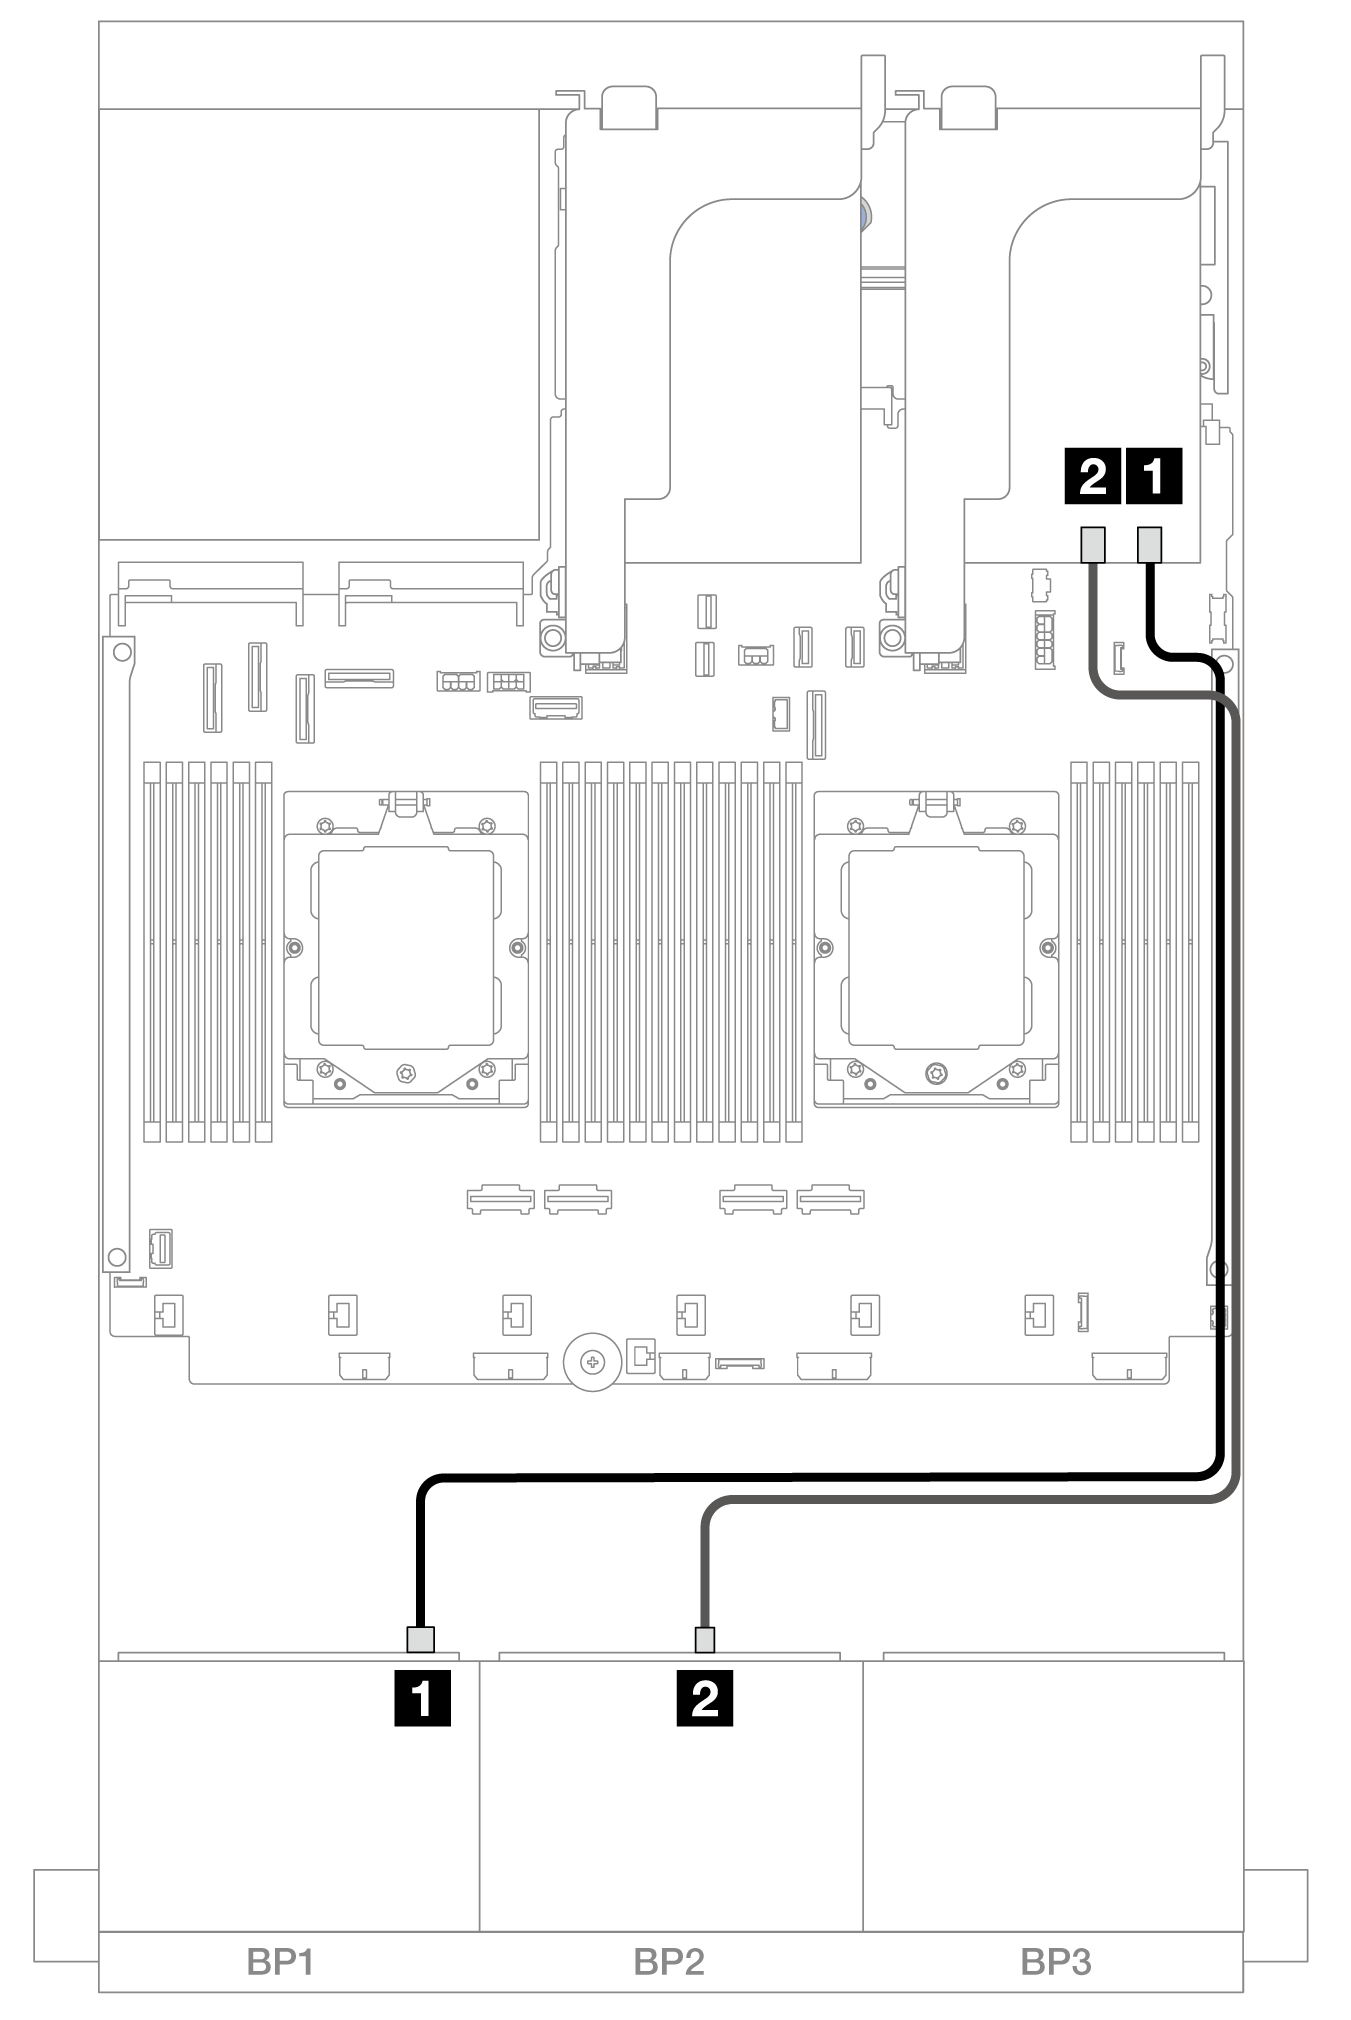 SAS/SATA cable routing to 16i adapter